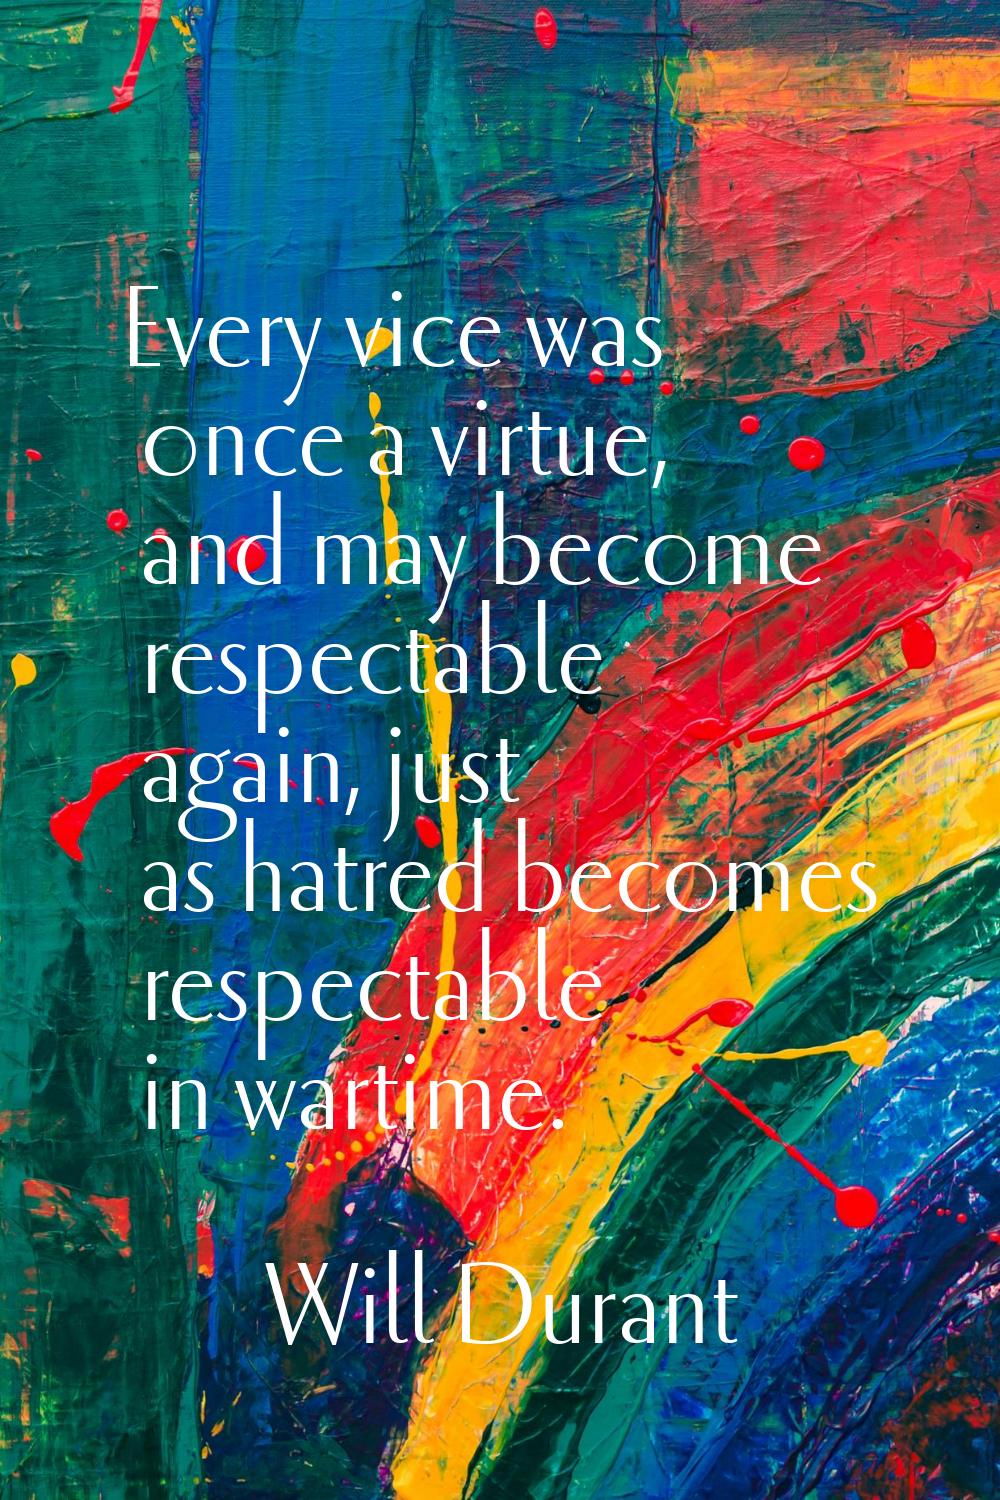 Every vice was once a virtue, and may become respectable again, just as hatred becomes respectable 